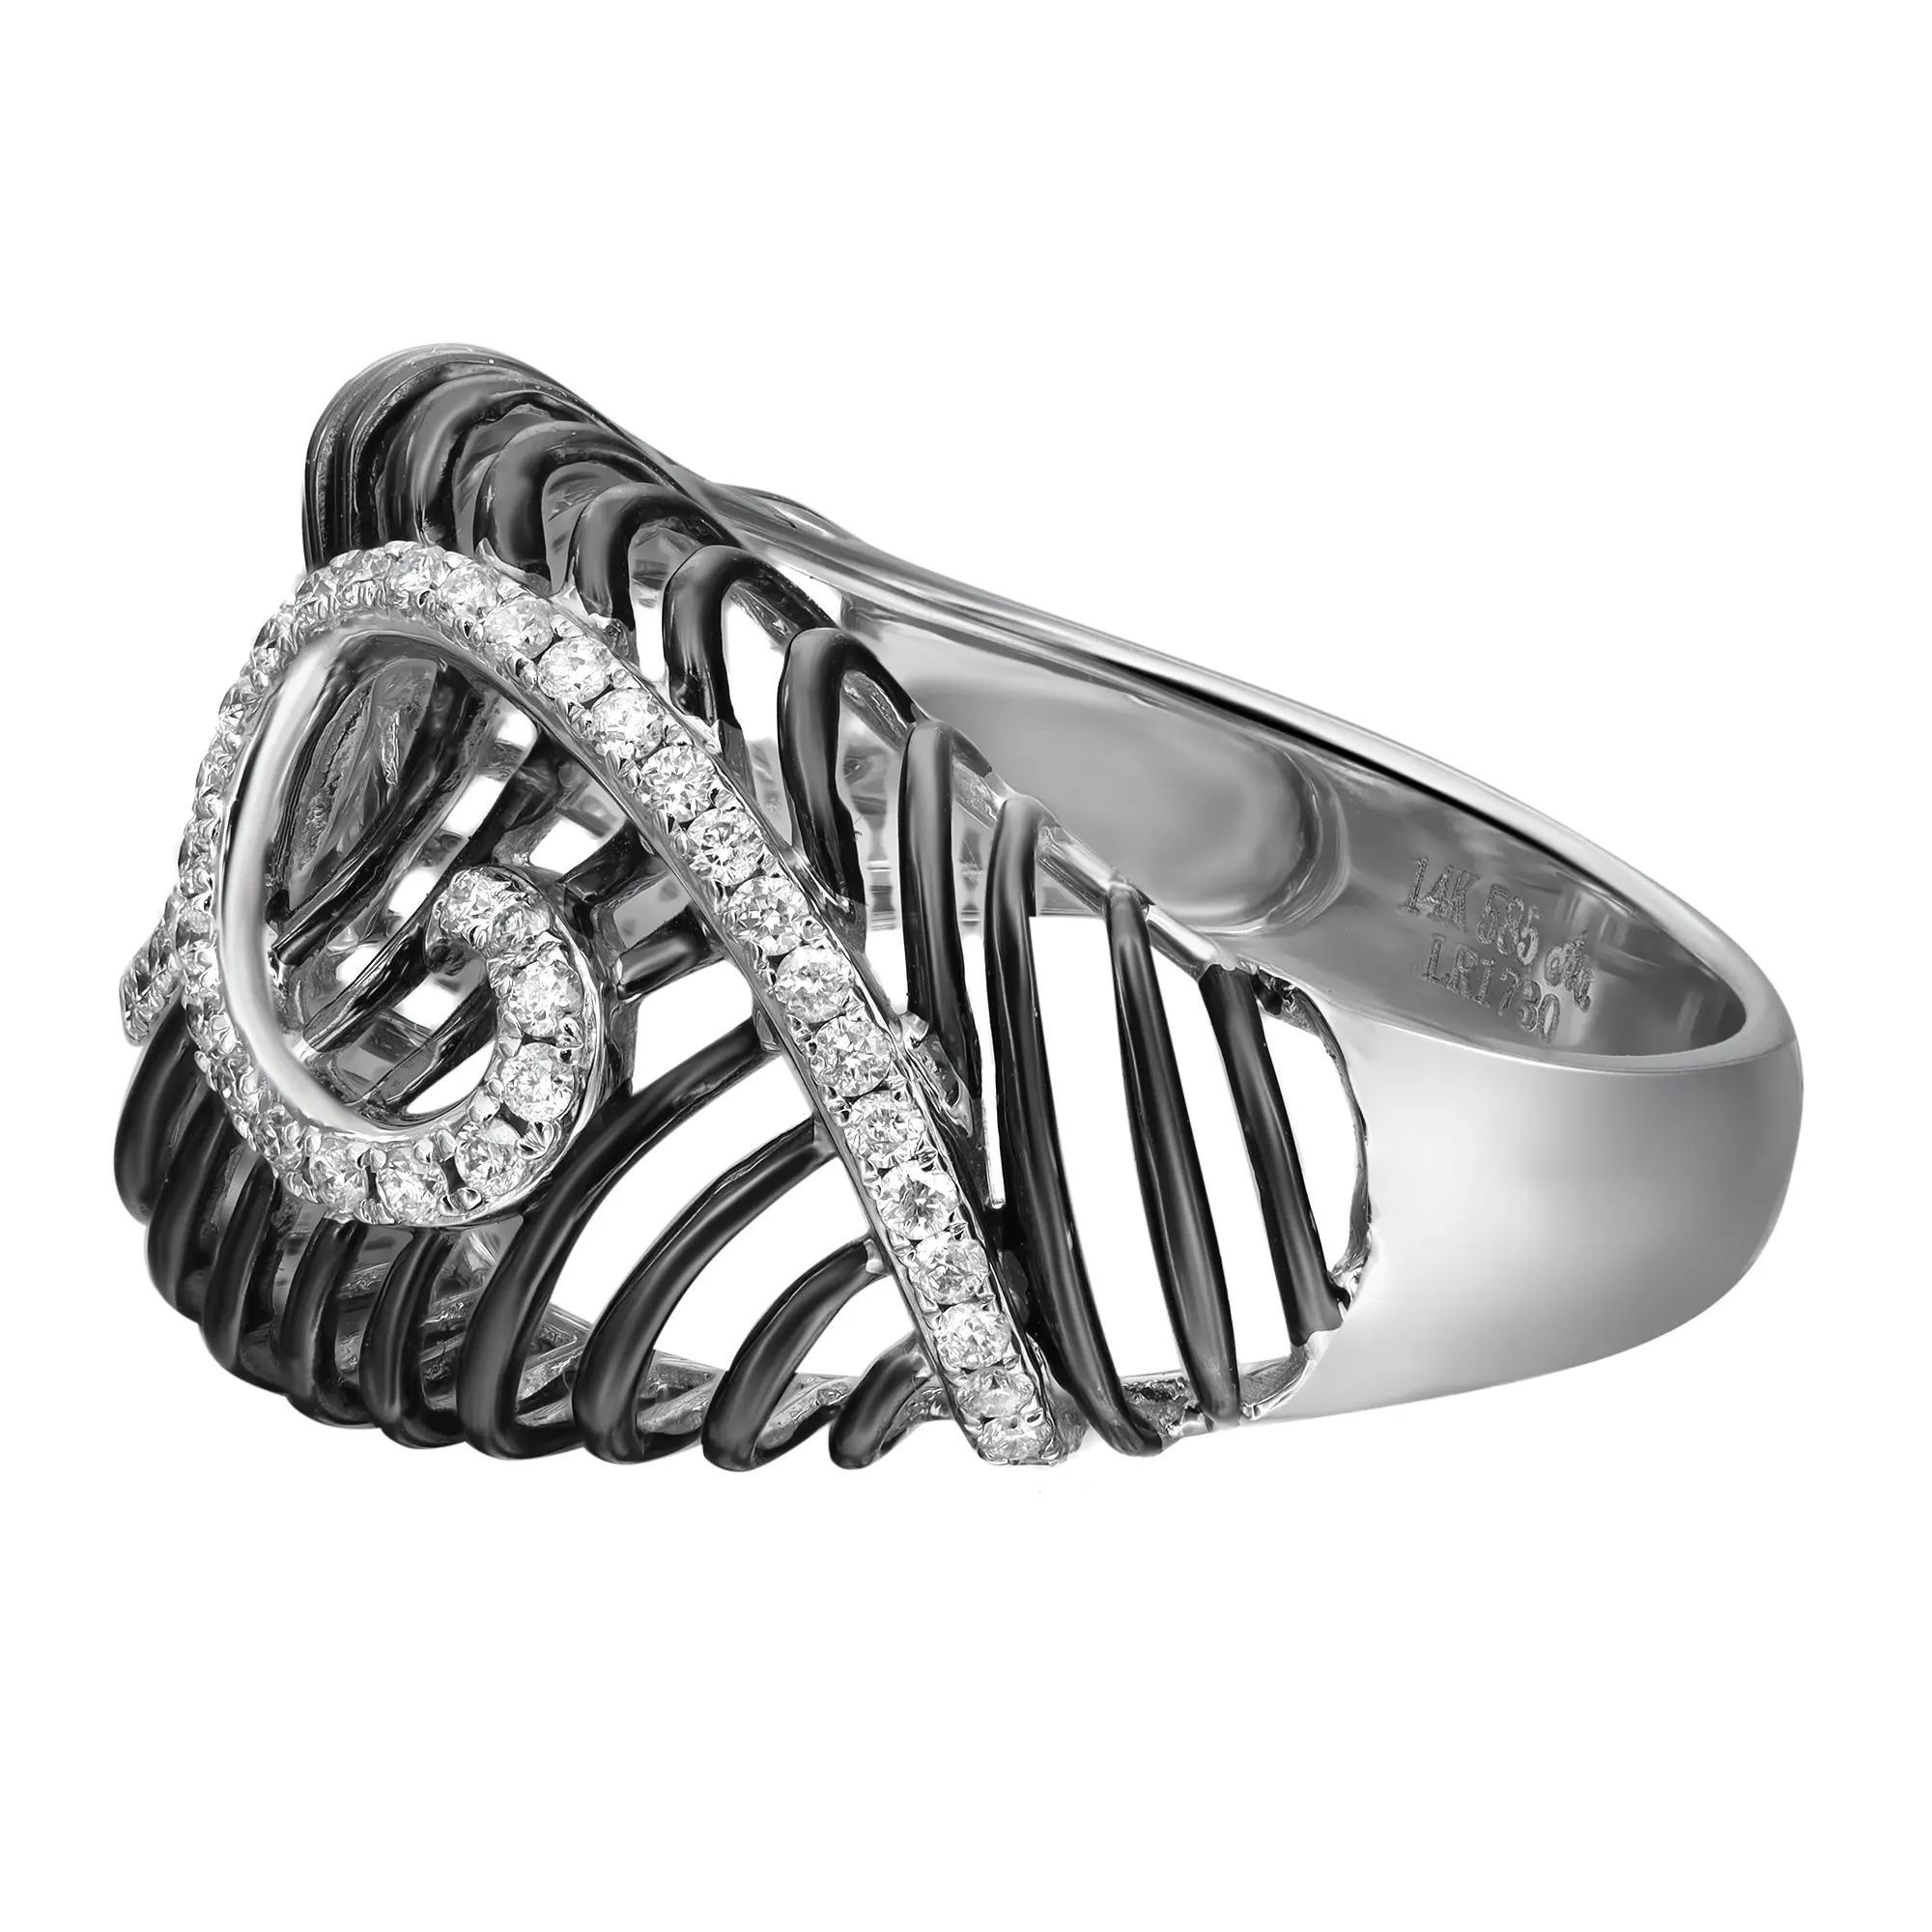 This stunning one of a kind wide cocktail ring is crafted in 14k white gold. It features dark rhodium plated intricate wire work design with prong set round brilliant cut diamonds weighing 0.34 carat. Ring size: 7.5. Total weight: 5.60 grams.